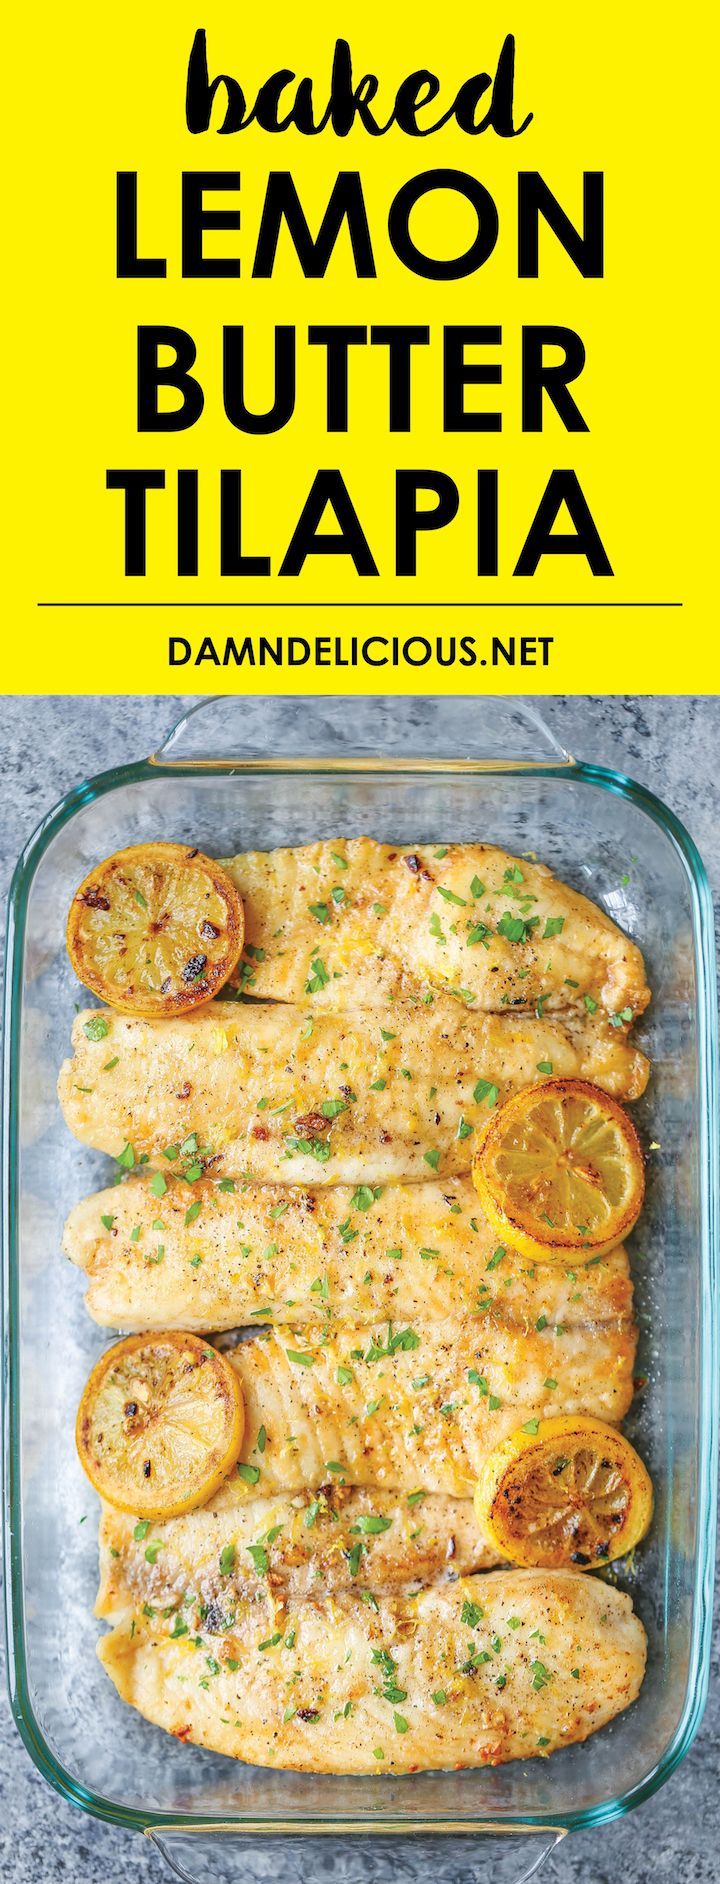 Baked Lemon Butter Tilapia – The easiest, most effortless 20 min meal ever from st